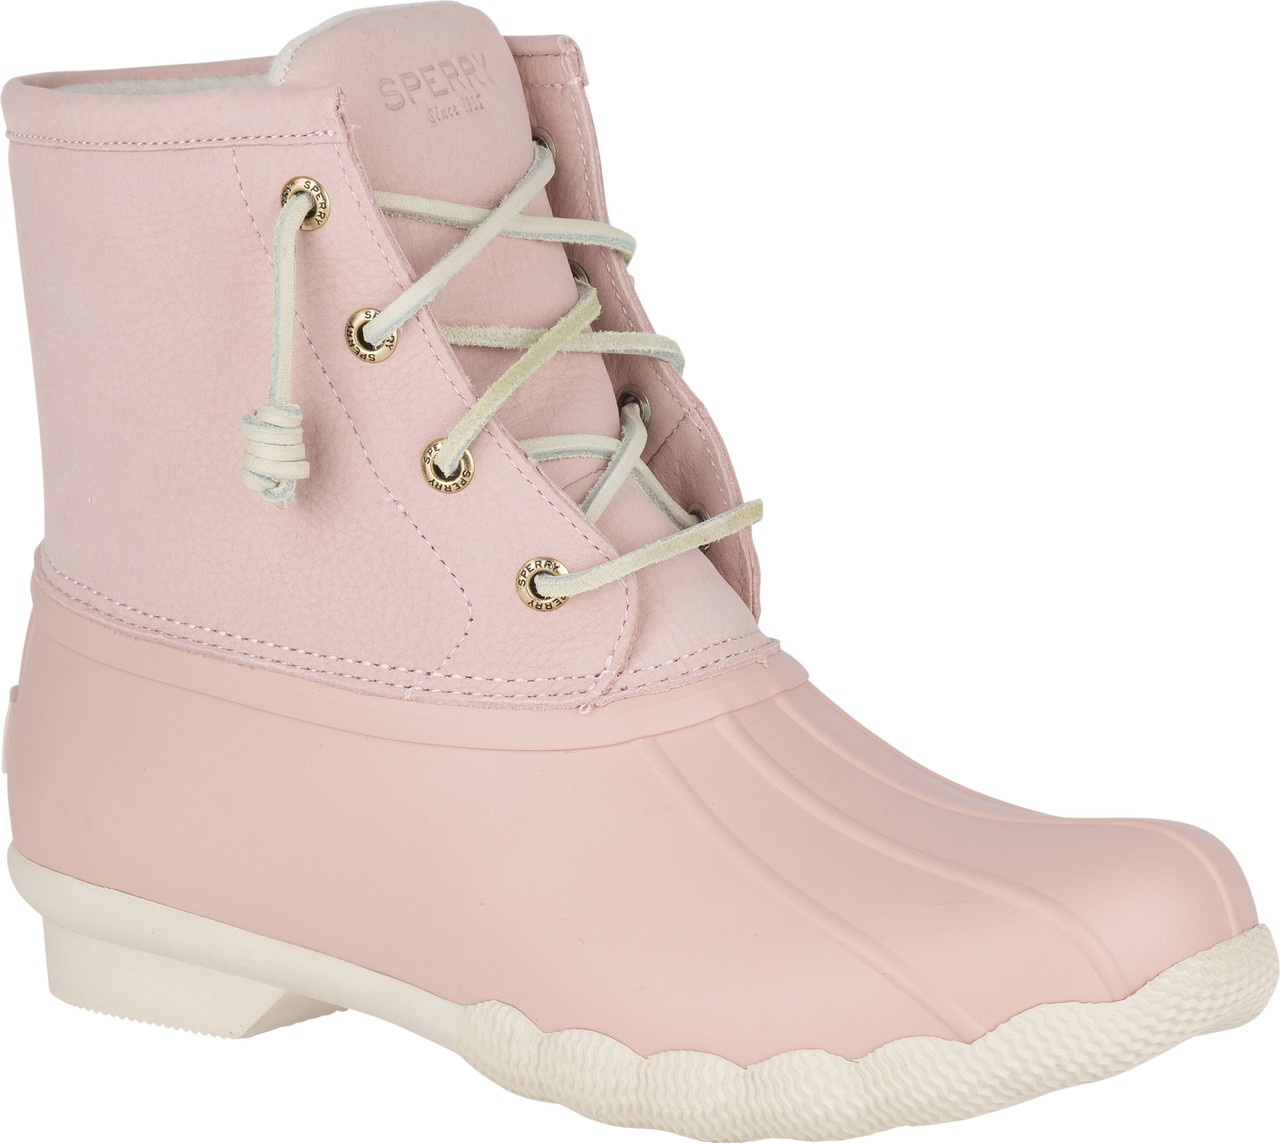 sperry snow boots womens